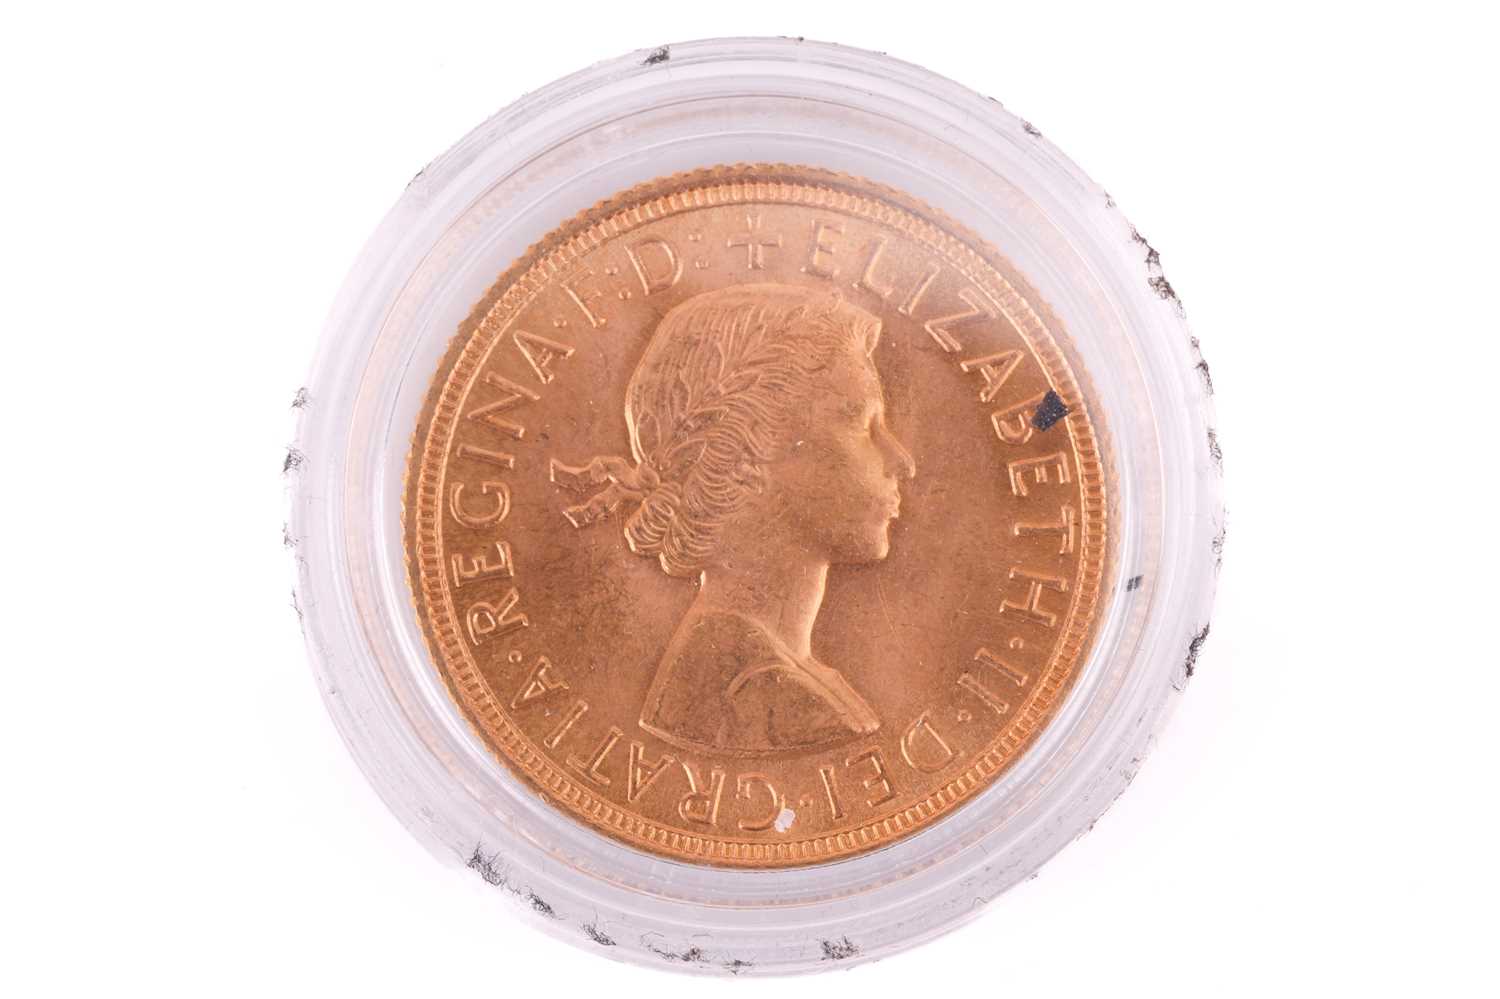 A 1958 Elizabeth II Full-Sovereign with a plastic case, circulated. - Image 2 of 2